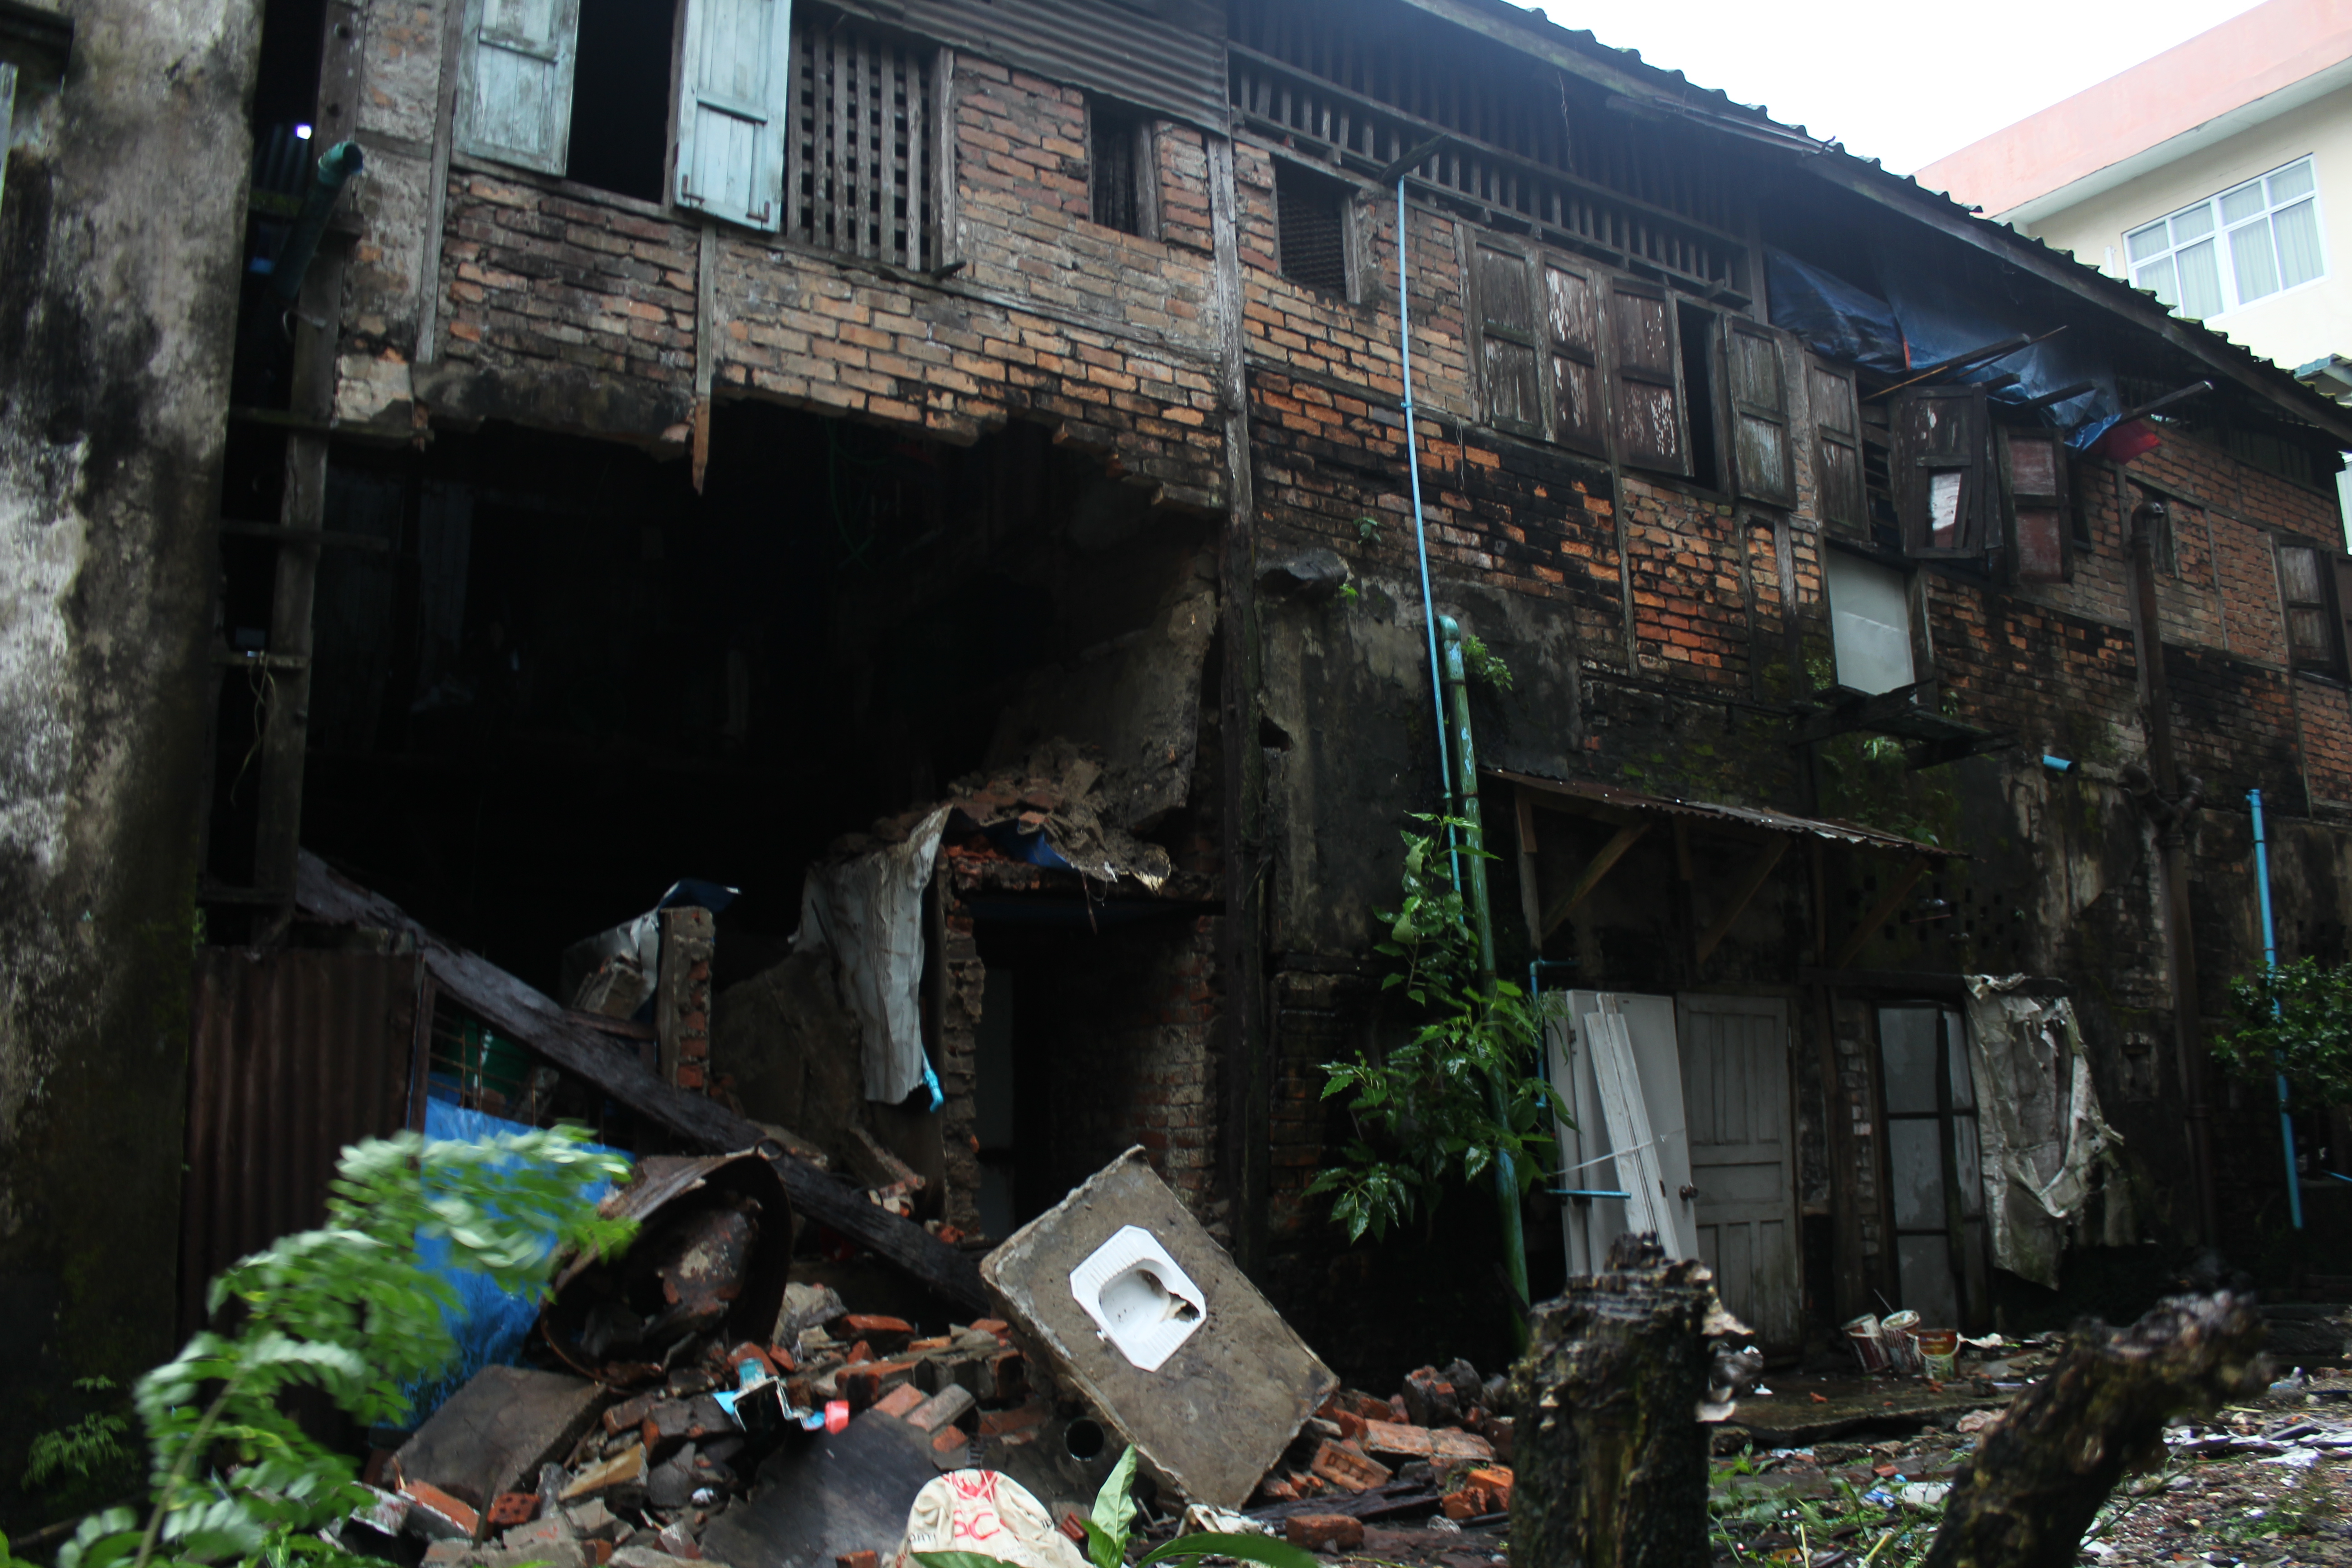 The collapsed wall of the building on 55th Street in Botataung Township, Yangon. Photo: Jacob Goldberg